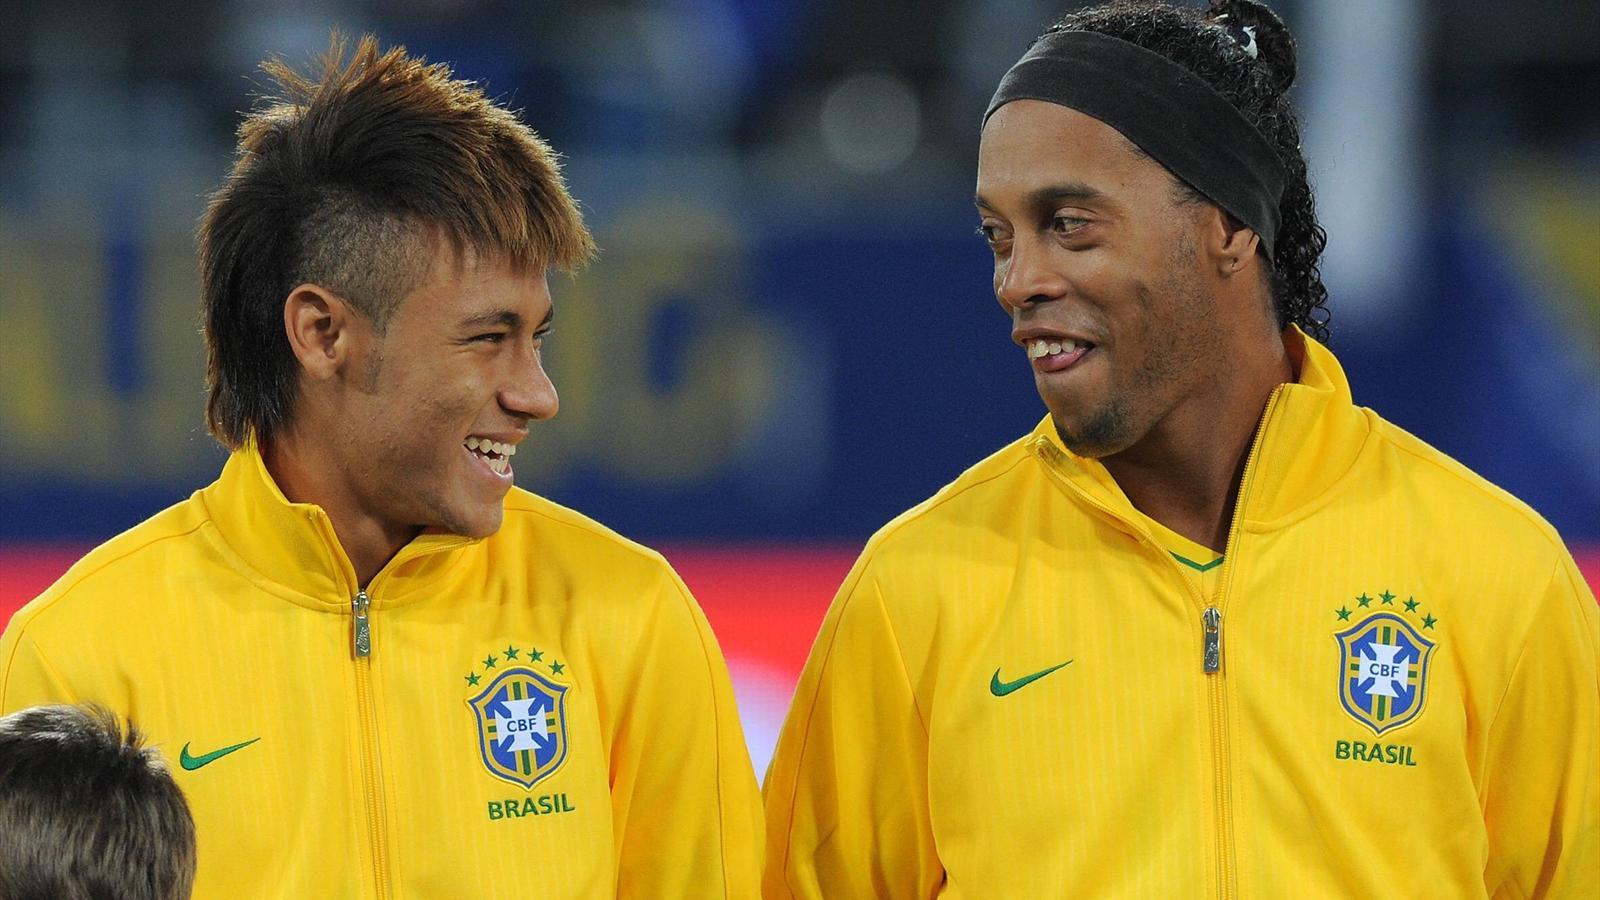 Ronaldinho - ''This player is as good as Messi and Cristiano Ronaldo''